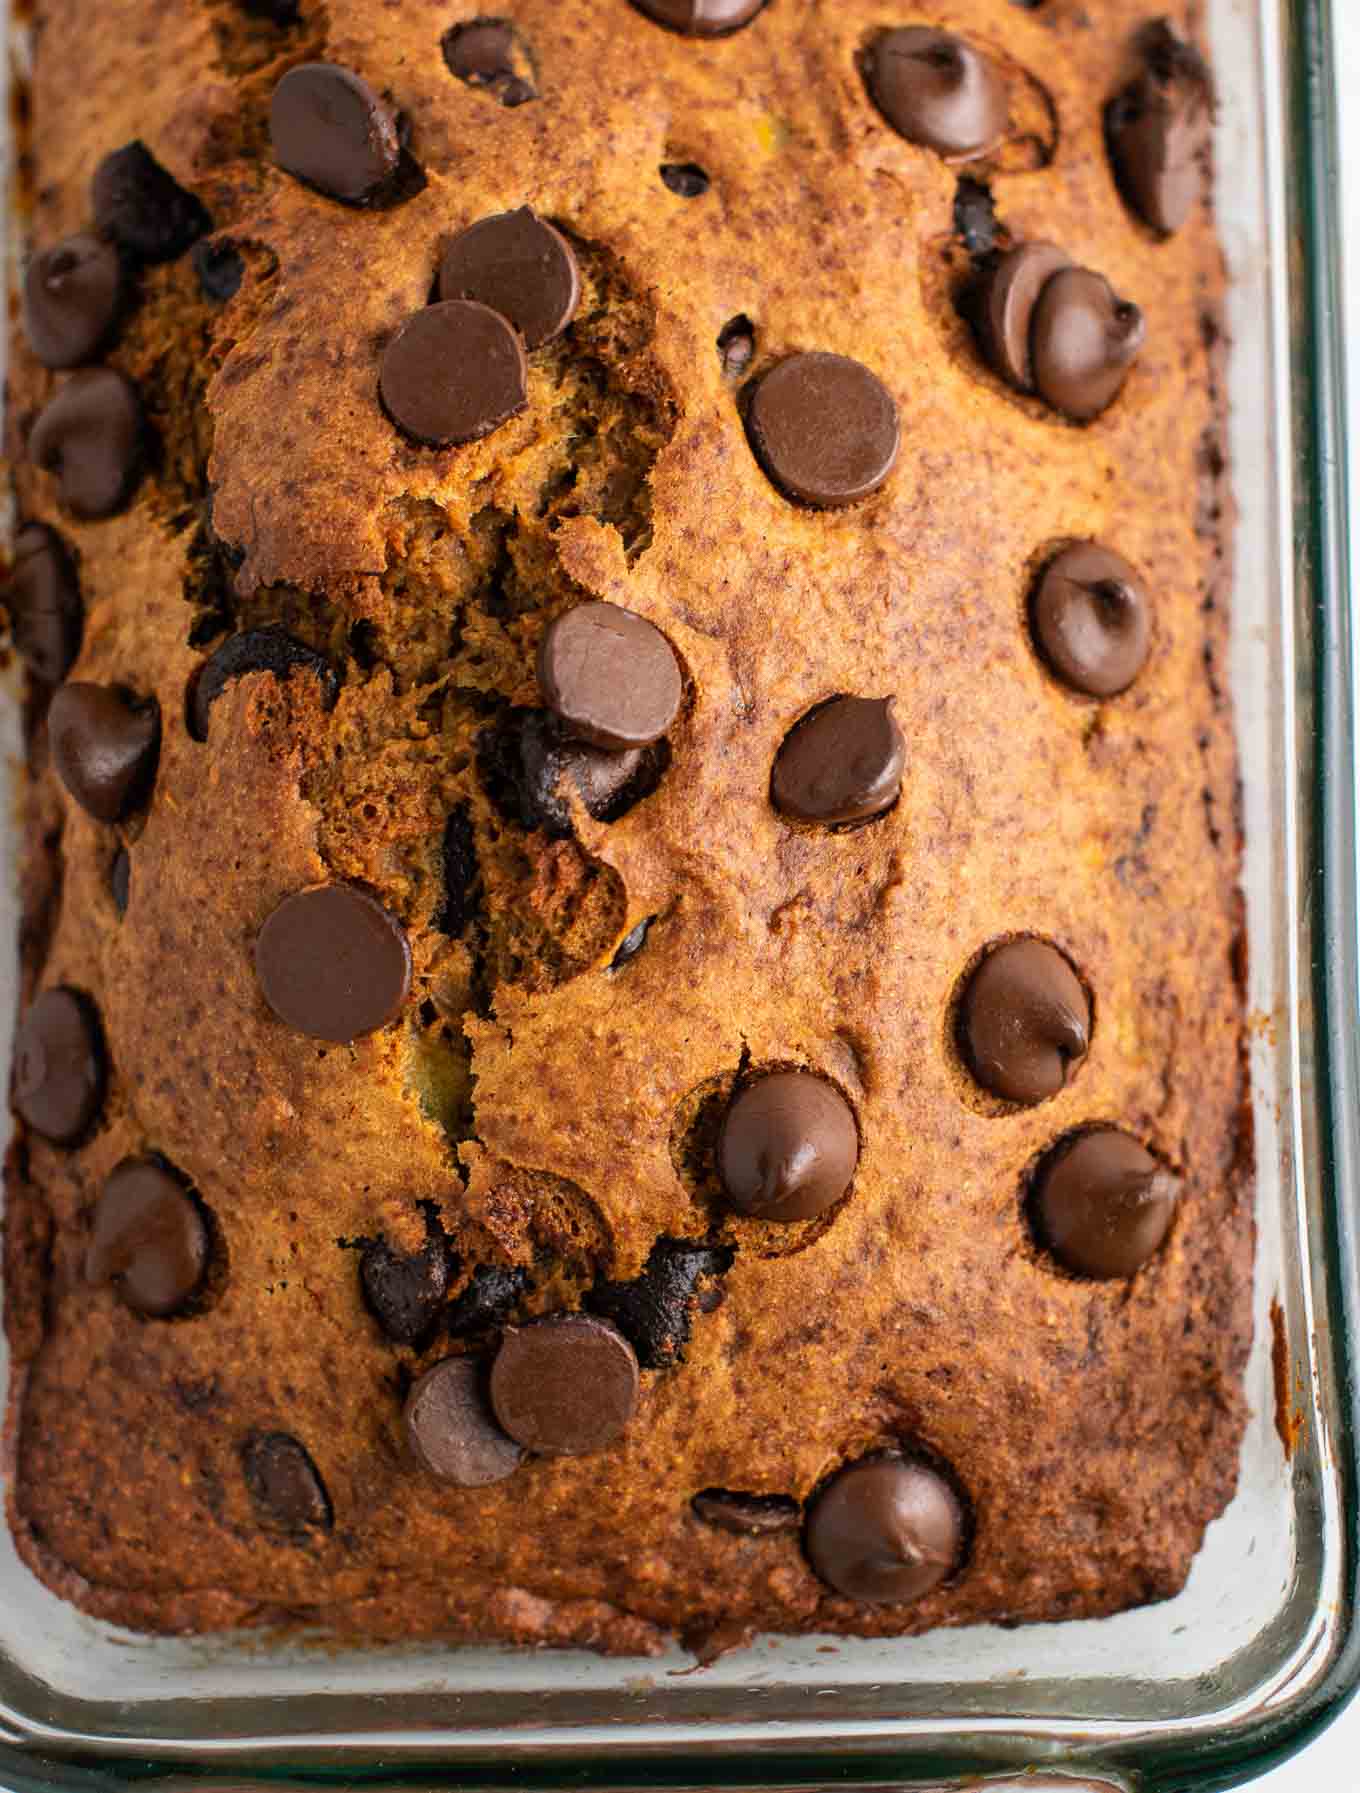 The BEST easy chocolate chip banana bread – full of wholesome ingredients and NO OIL or dairy! Everyone loves it when I bake this! #wholewheat #bananabreaad 